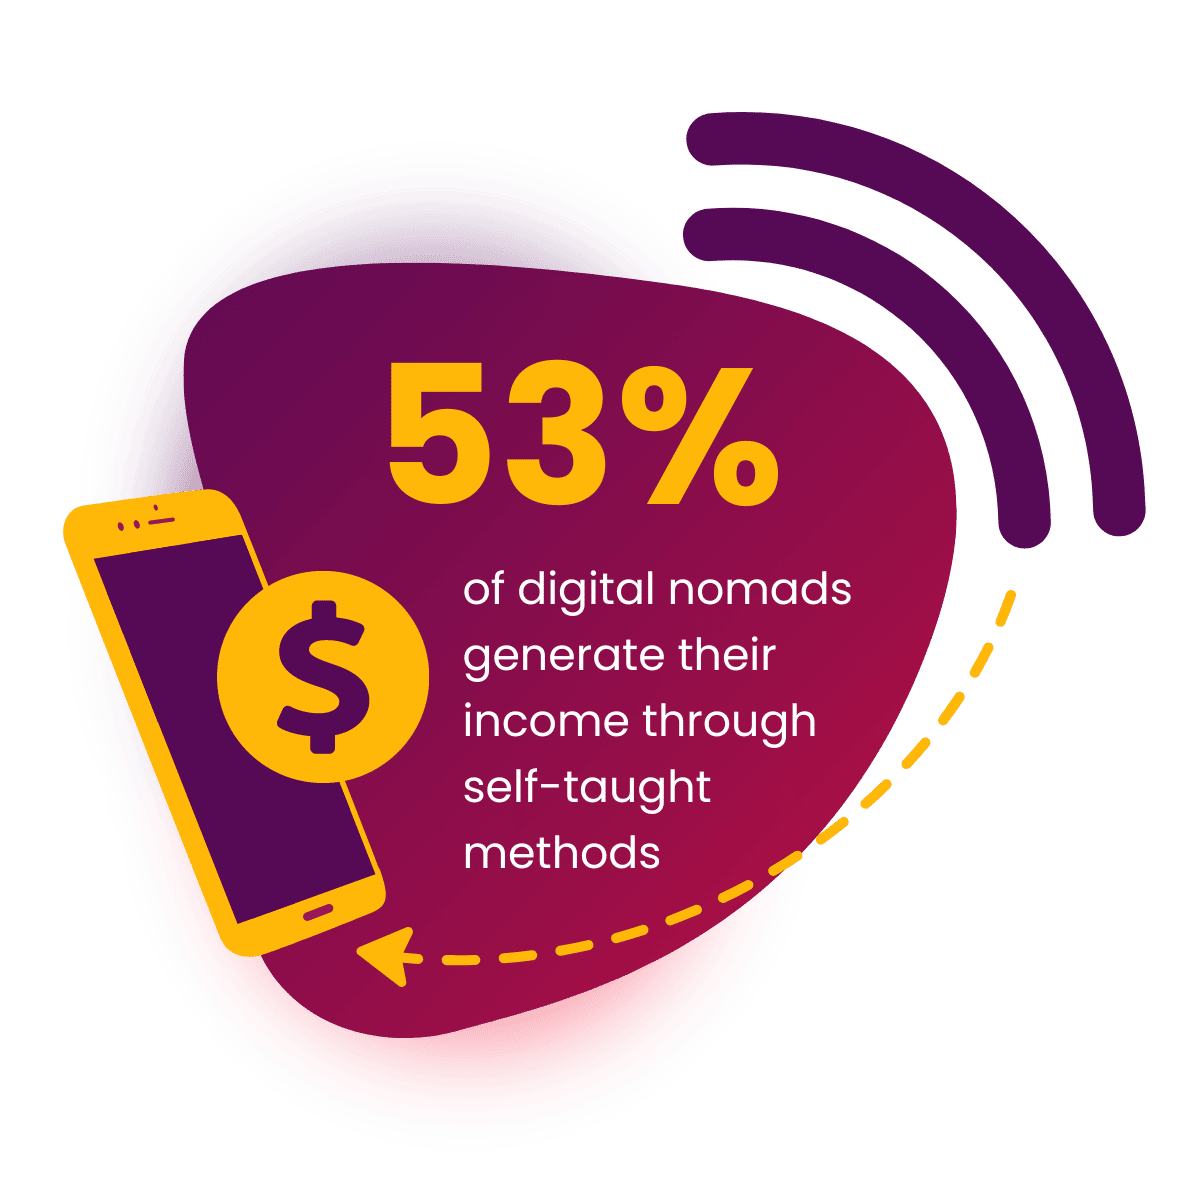 Make Passive Income Reselling Digital Products - Digital Nomad Quest